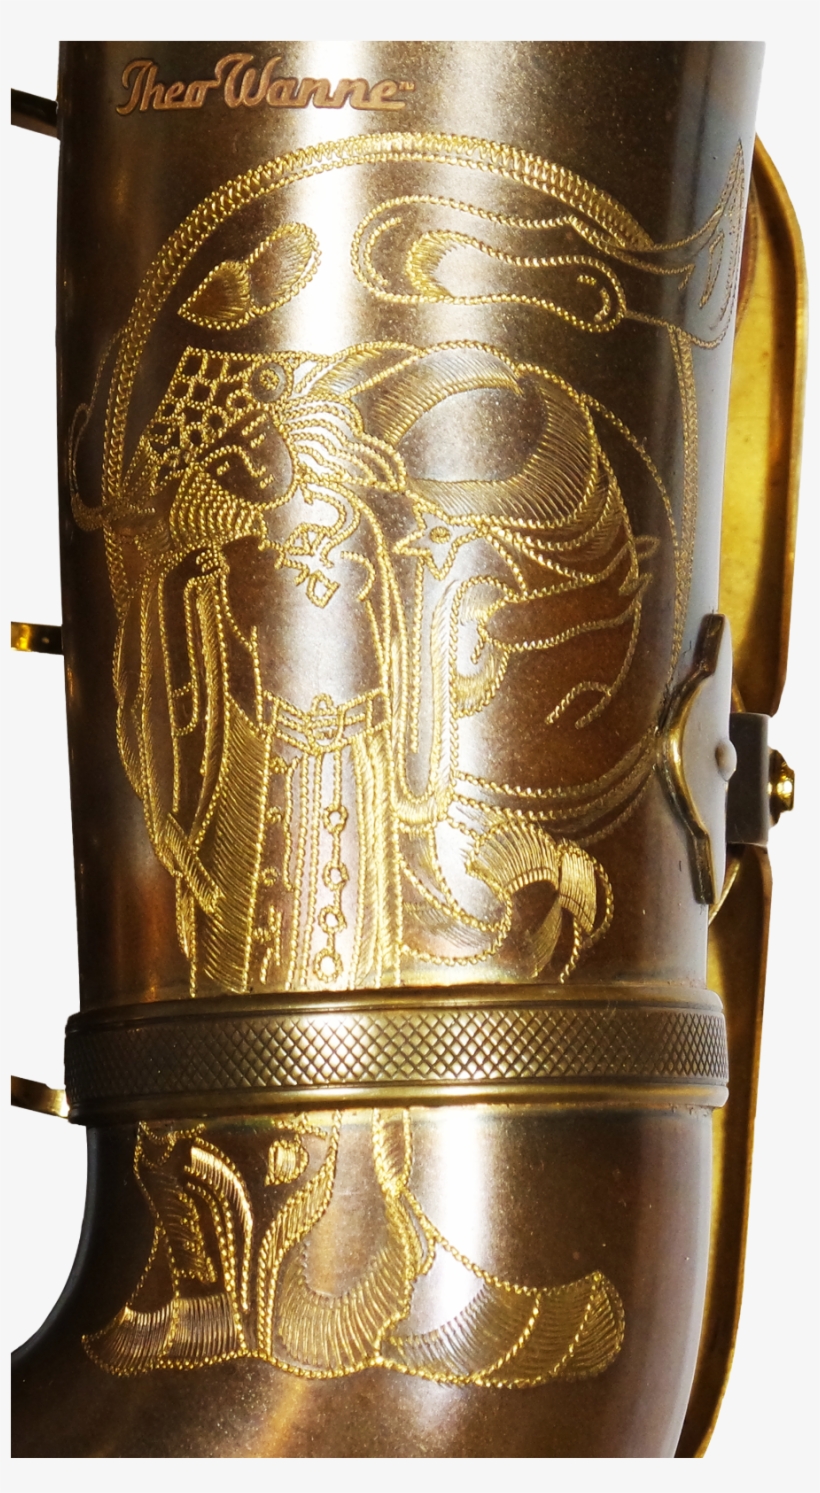 2 Of 12 Theo Wanne Mantra2 Curved Soprano Sax Vintified - Riding Boot, transparent png #7950188